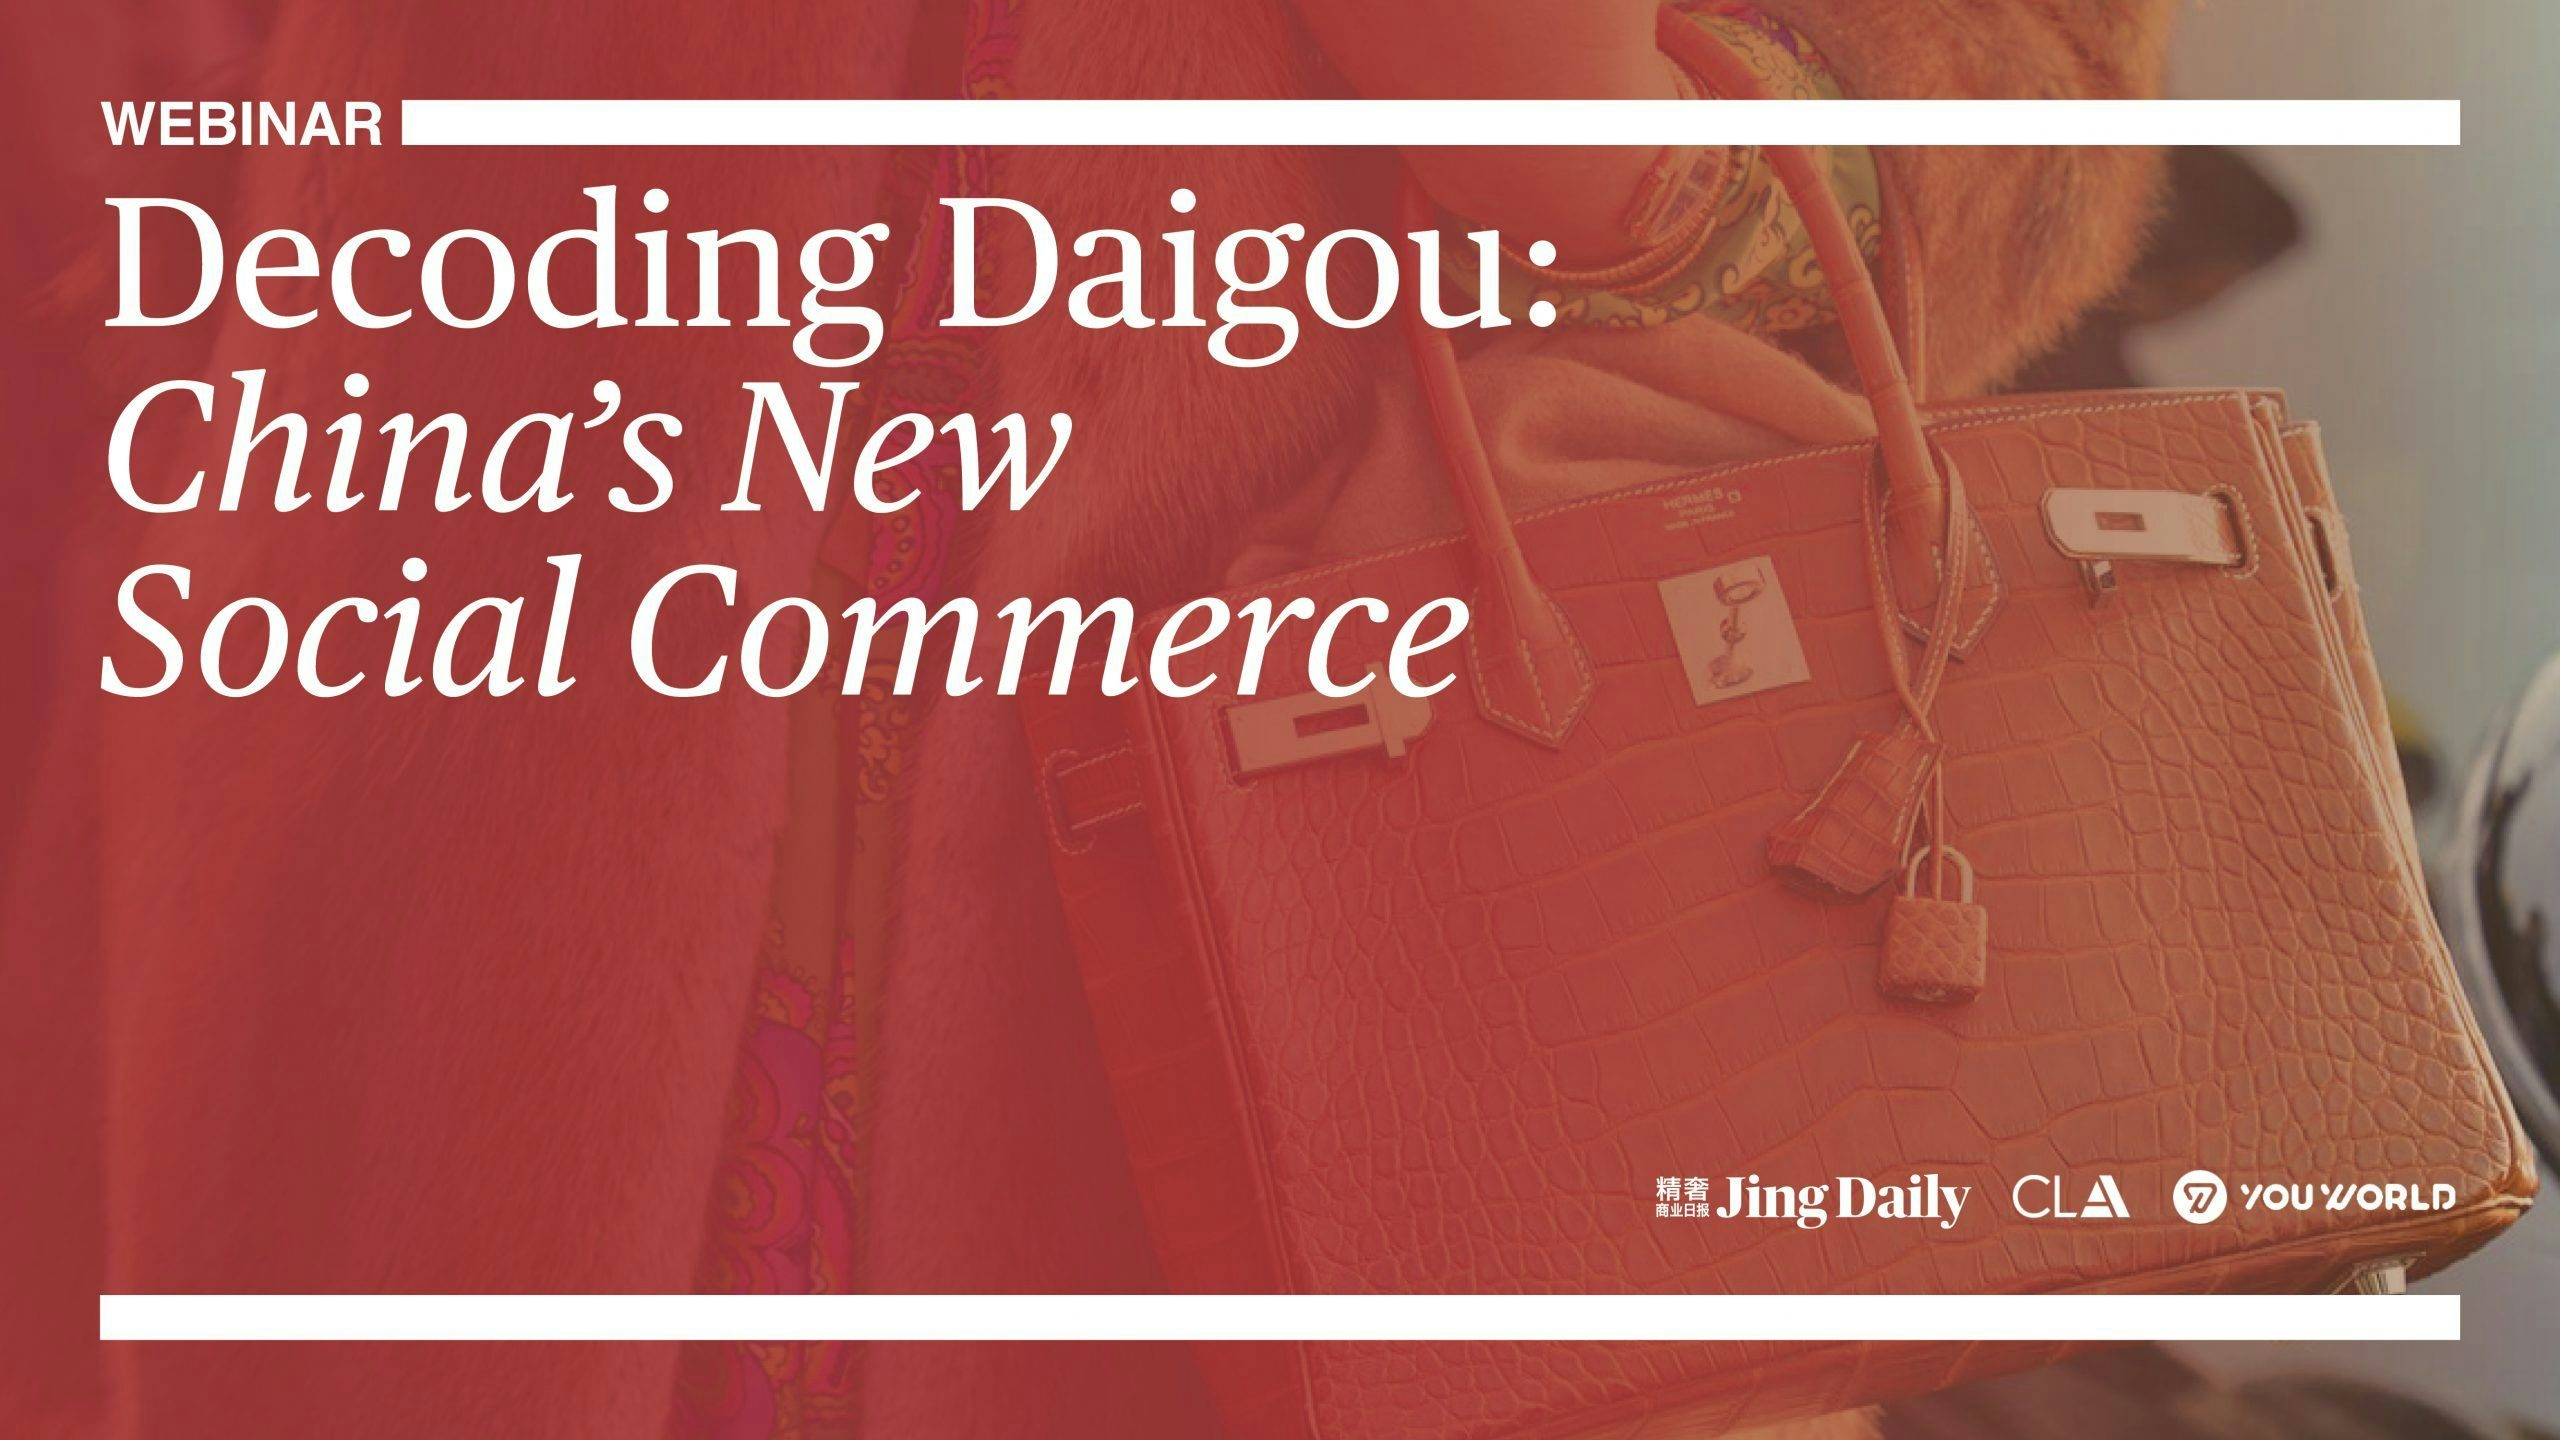 Key Takeaways from the Webinar ‘Decoding Daigou: China’s New Social Commerce’